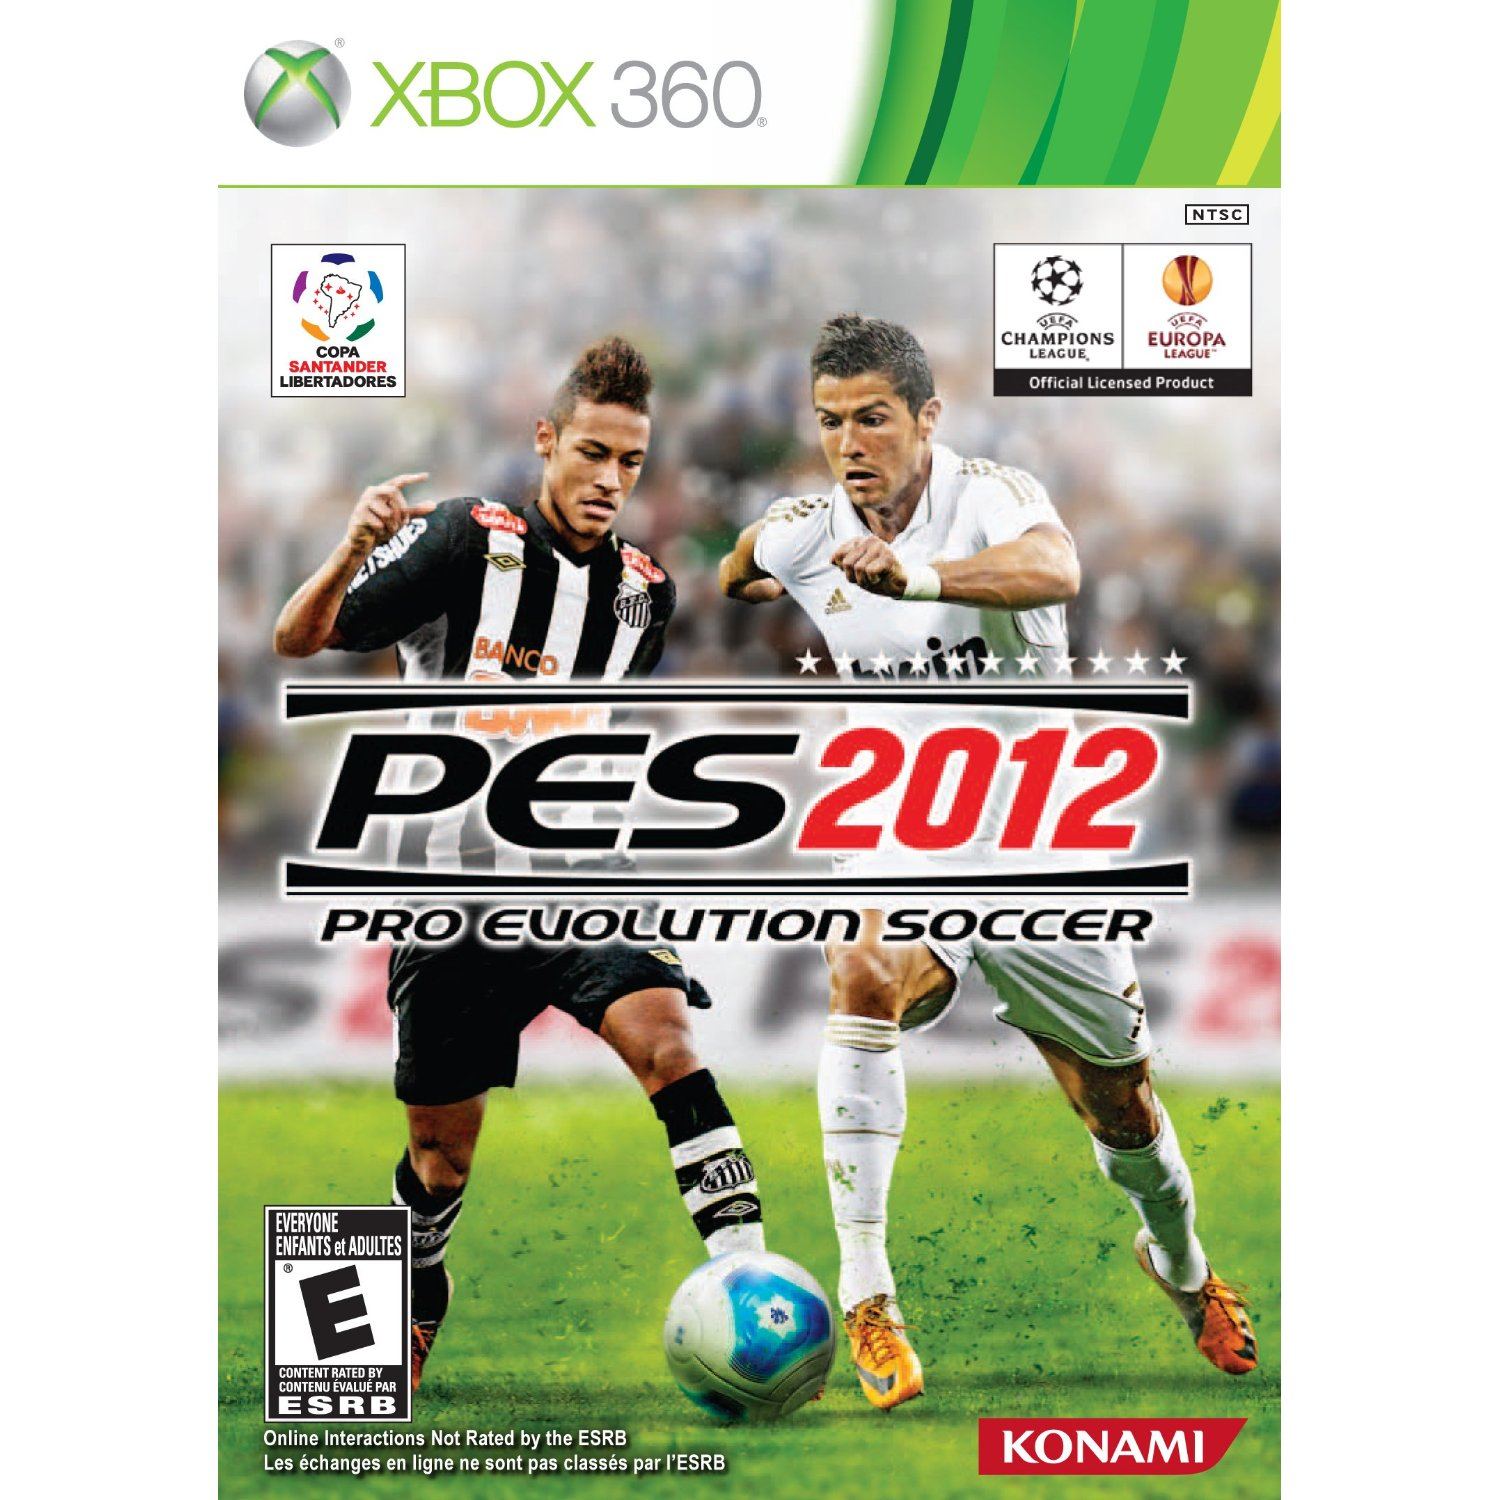 PES 2012 Xbox 360 , pes 2012 ps2 iso pt-br 